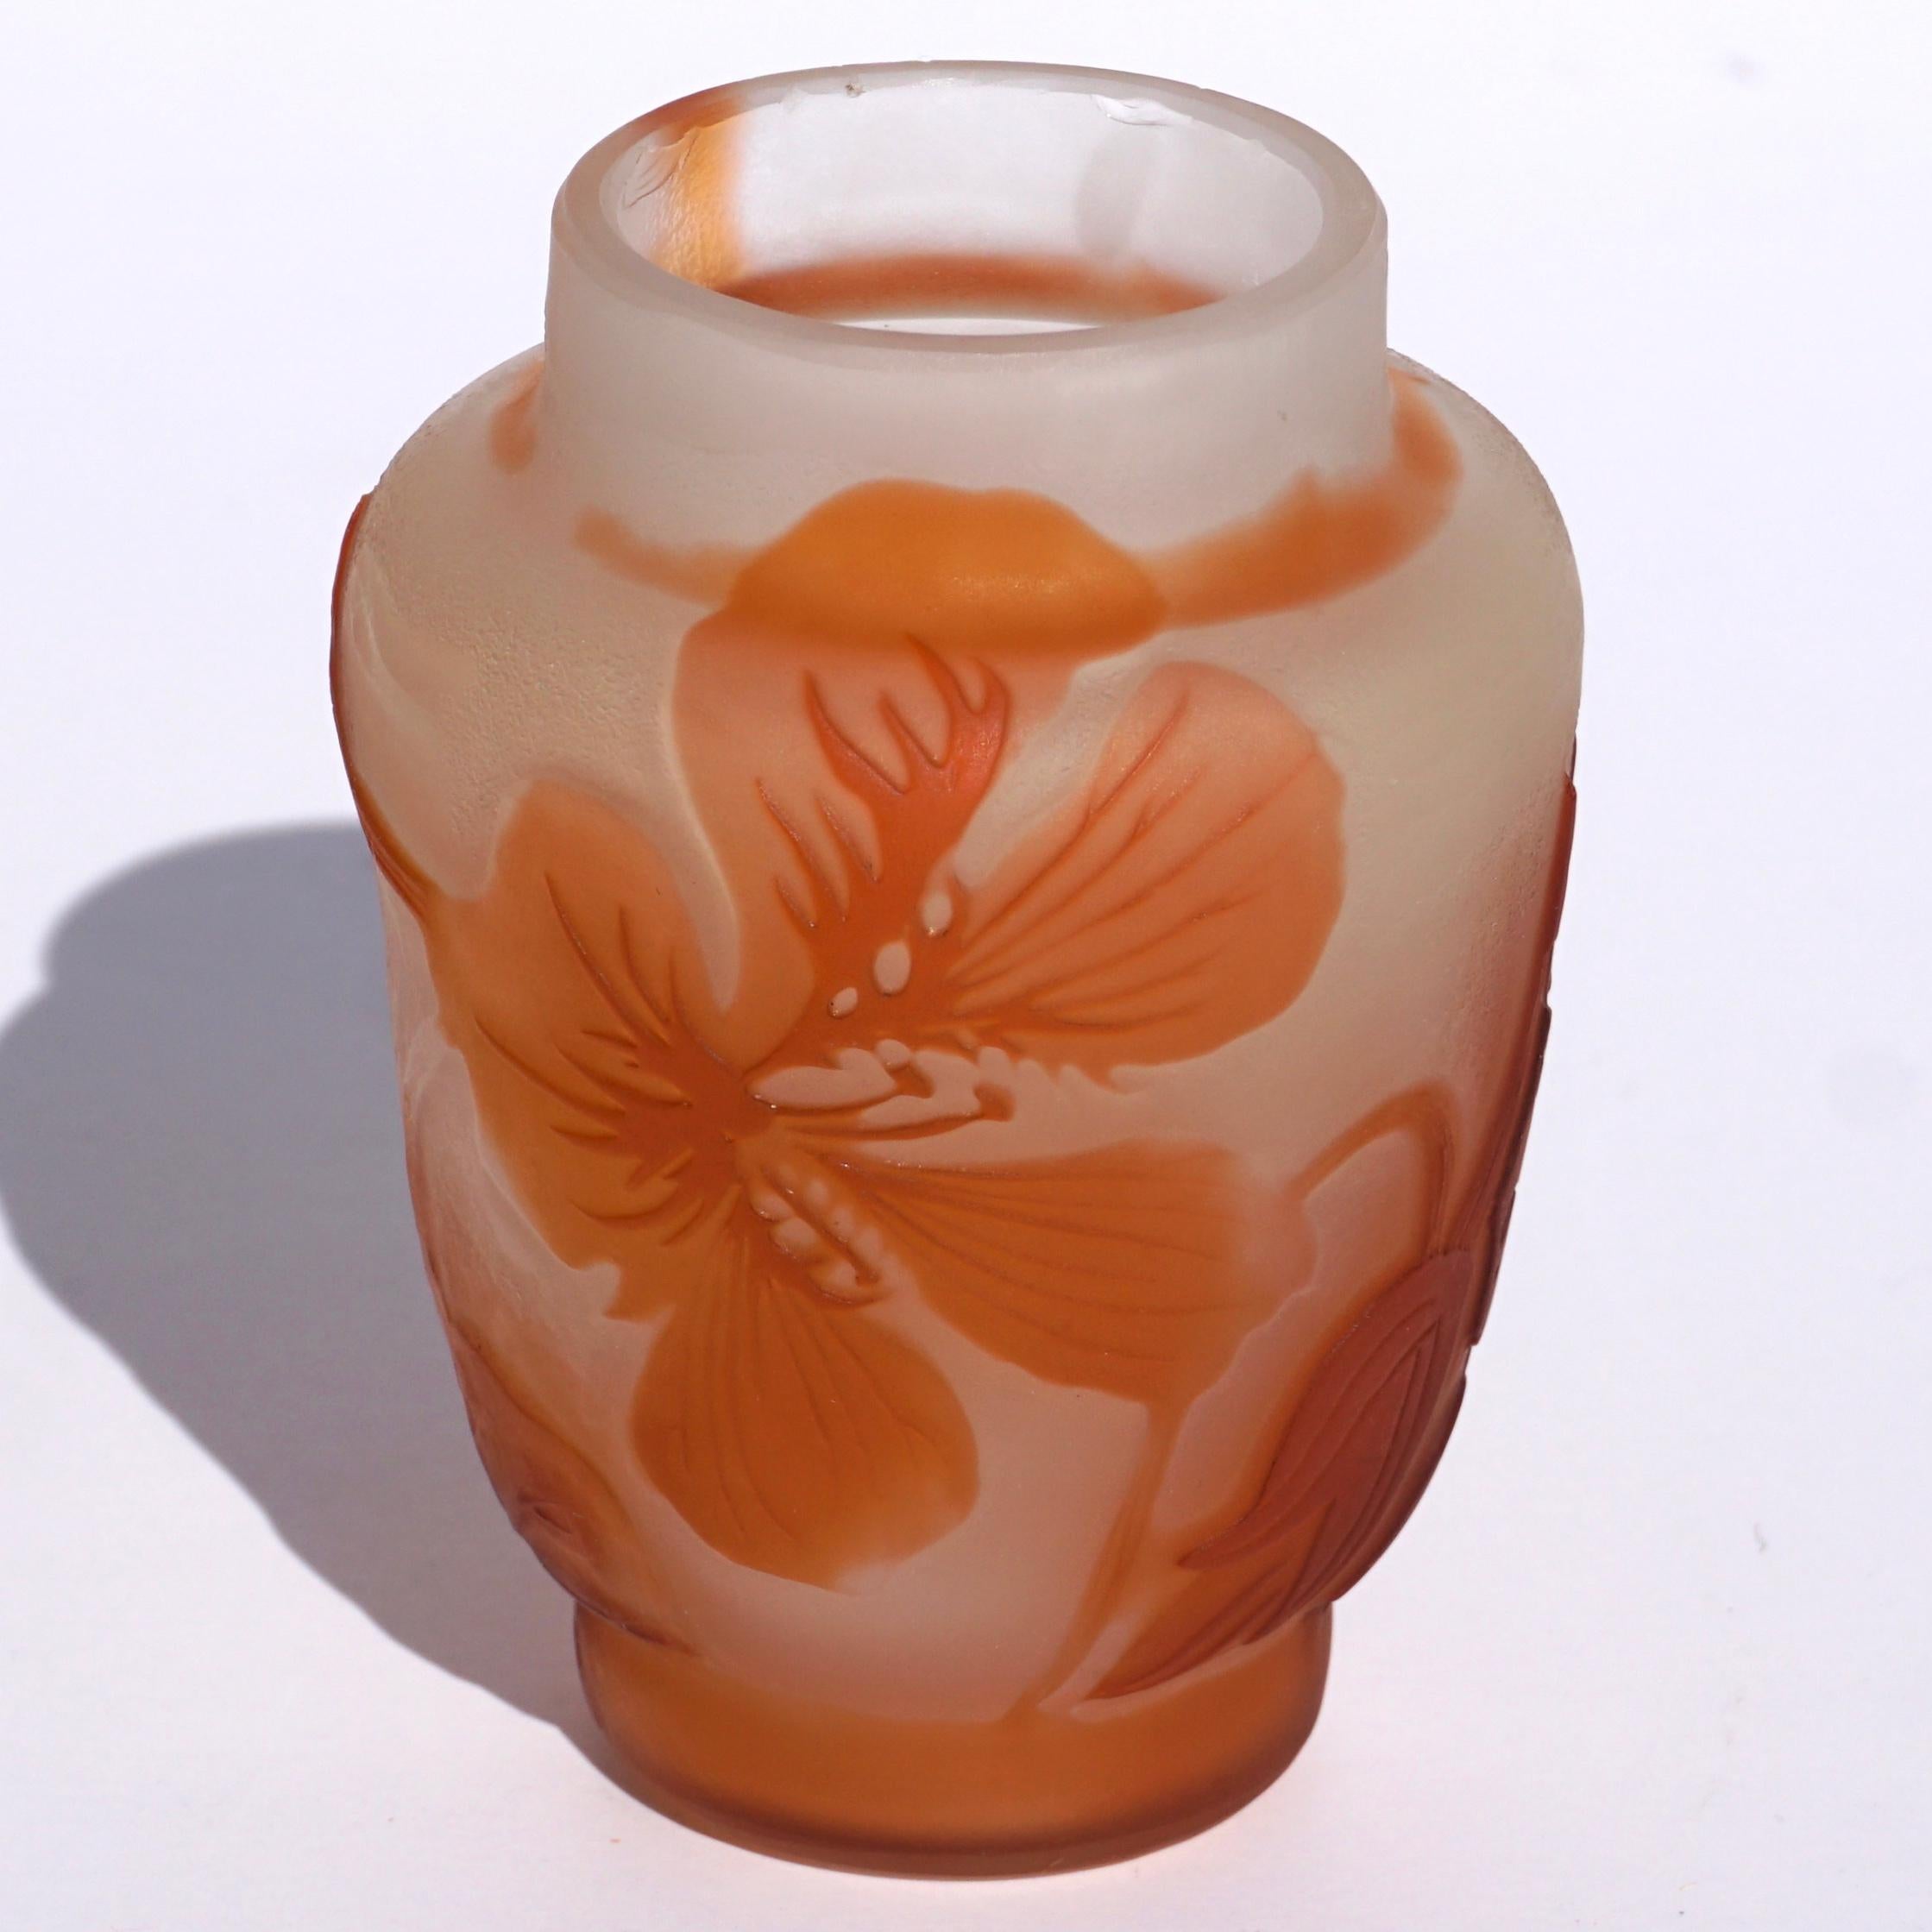 A delightful Japonesque floral vase by Emile Galle circa 1900. Wheel carved and acid etched in cameo with a cream background showing beautiful floral leaves and flowers.

Raised signature in cameo “Galle”

Measures: Height 3.25 inches. diameter 2.3